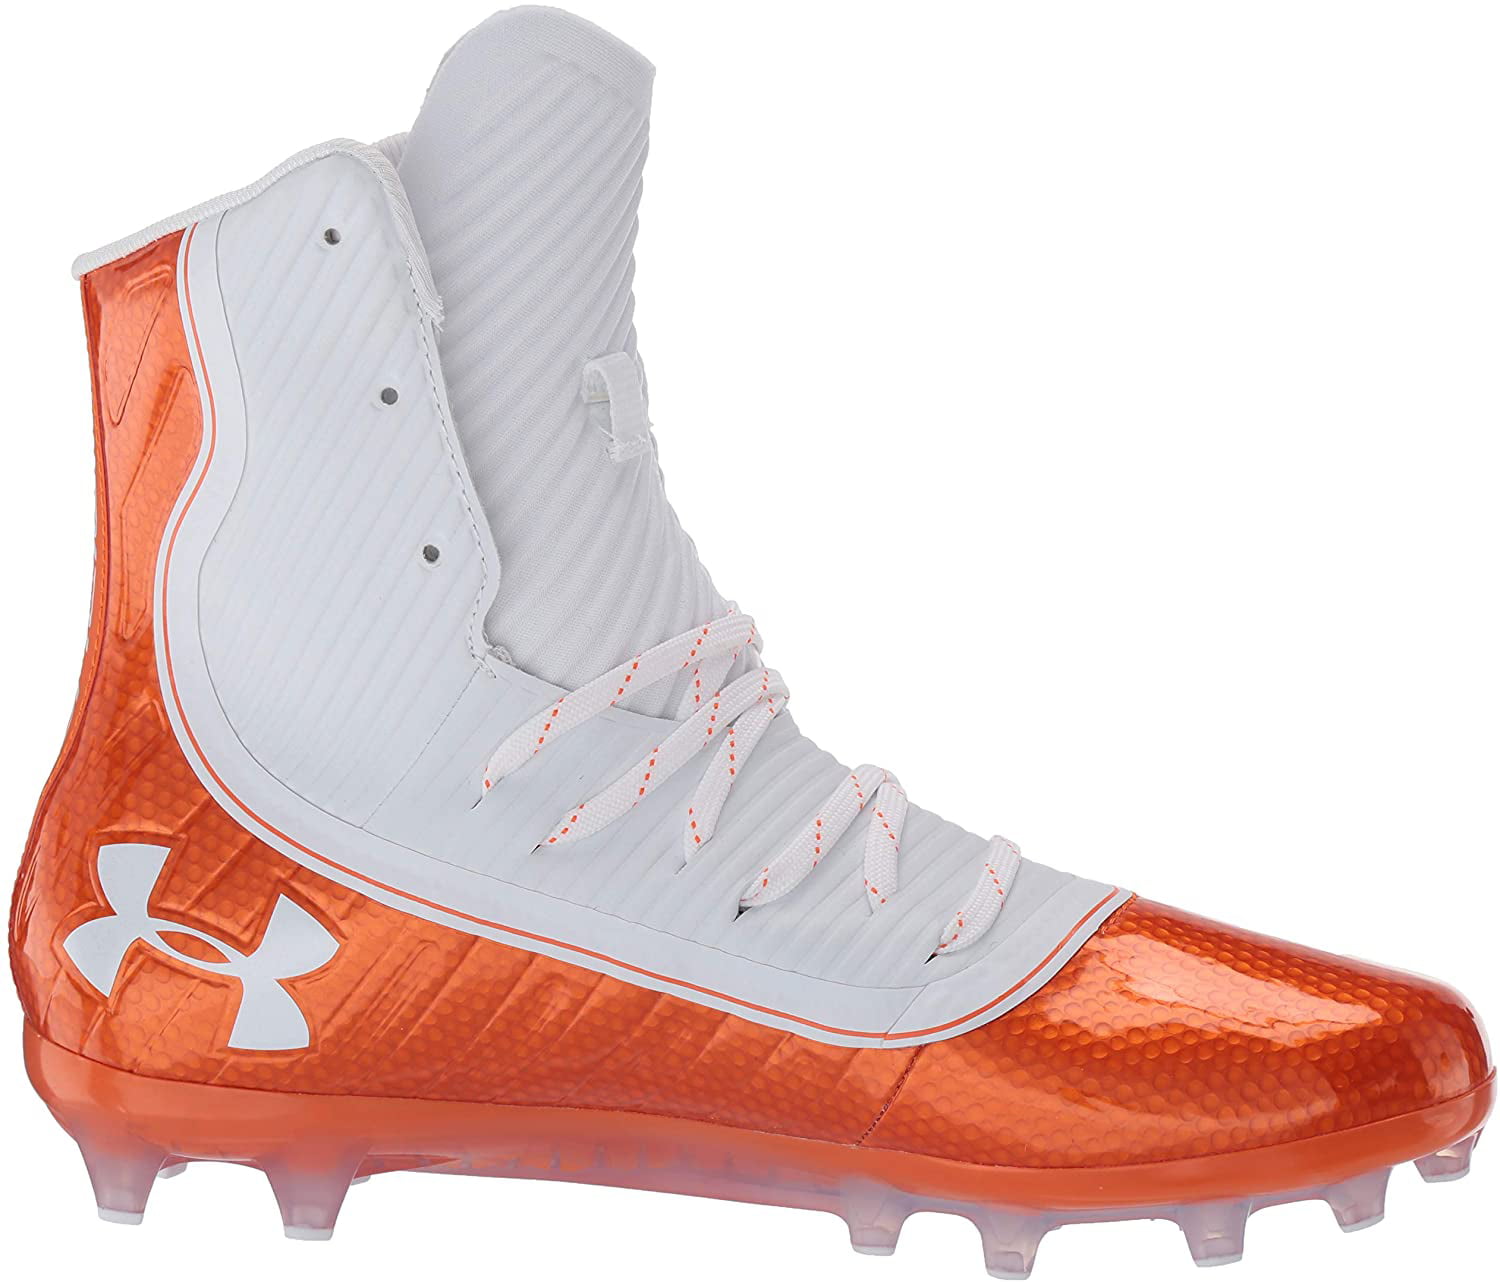 Under Armour Men's Ua Highlight Mc – Limited Edition Football Cleats for  Men